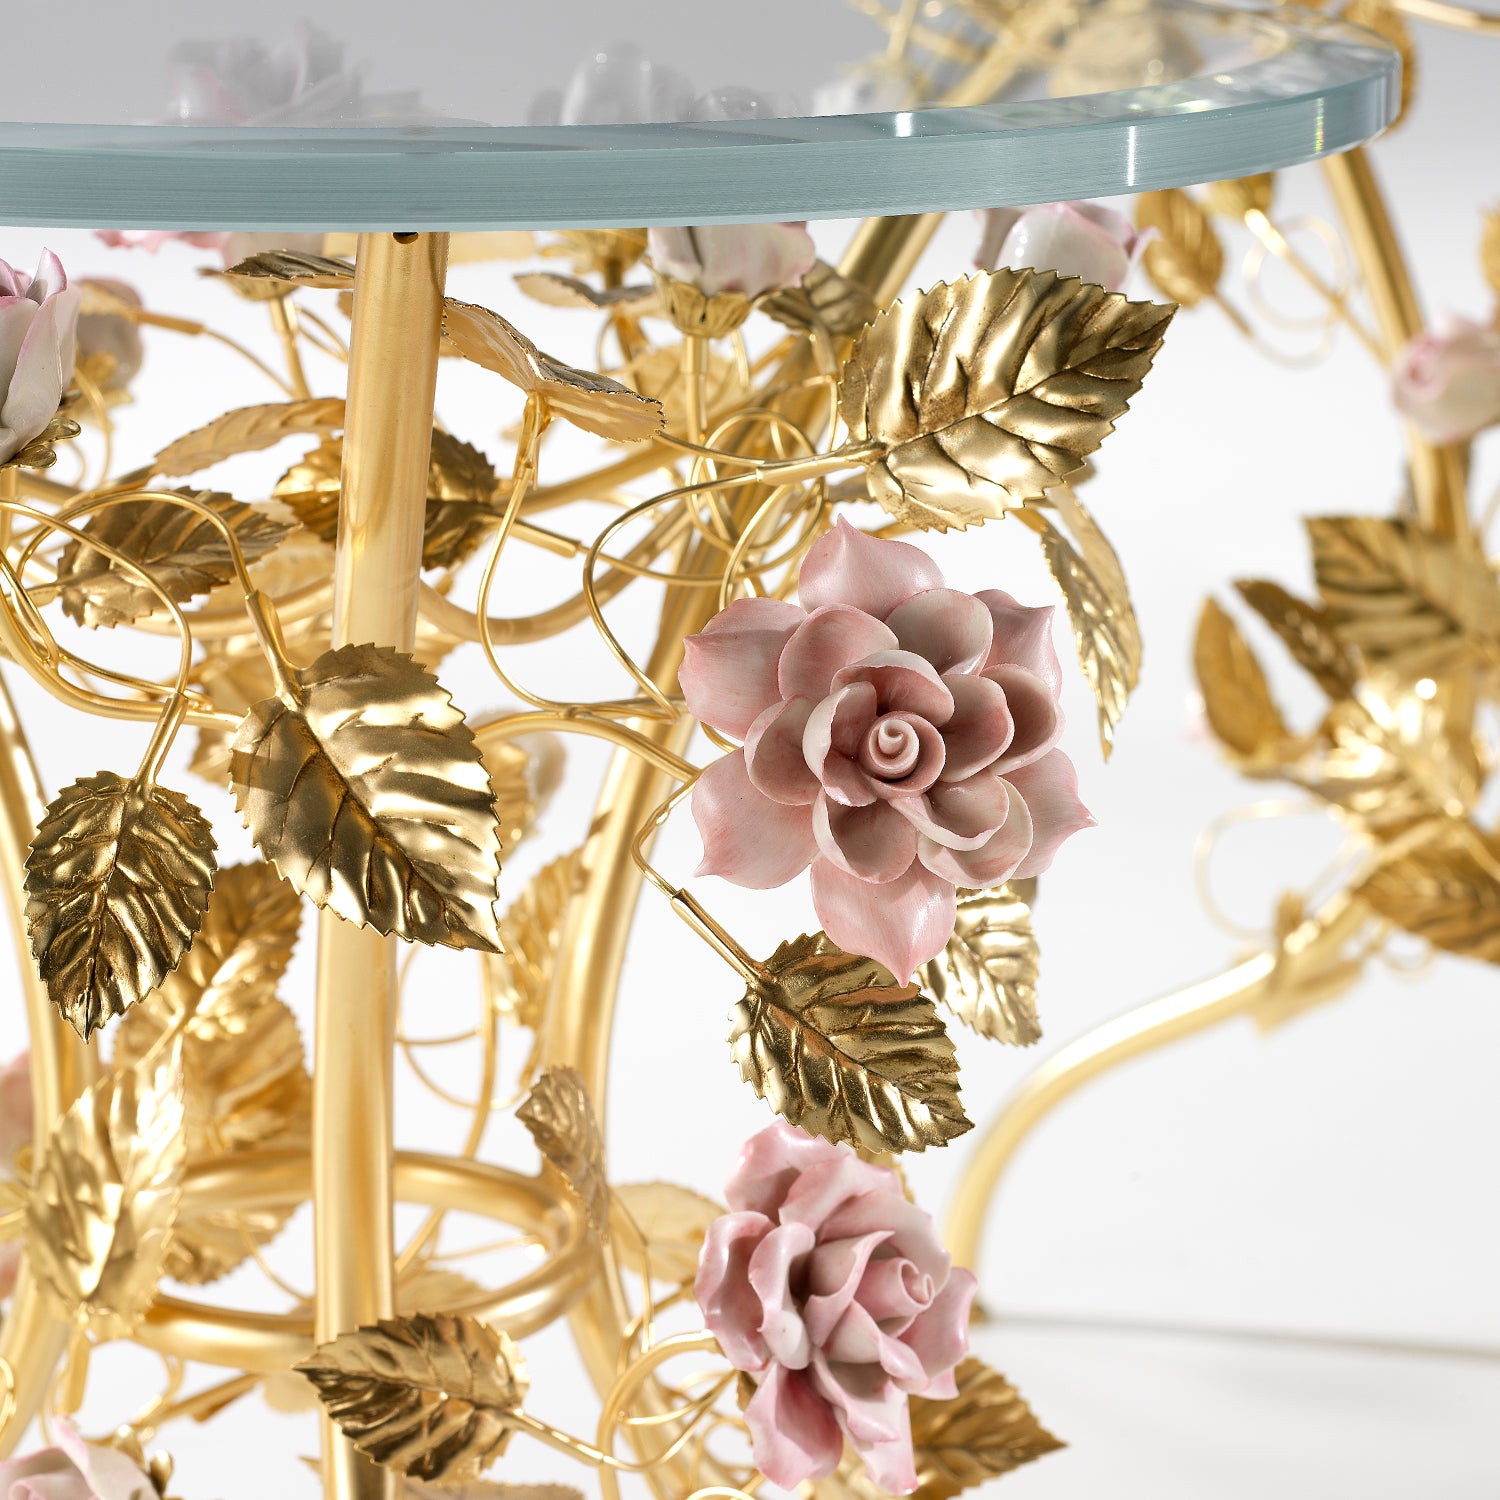 Maire-Antoinette Small Coffee Table - Gold & Pink